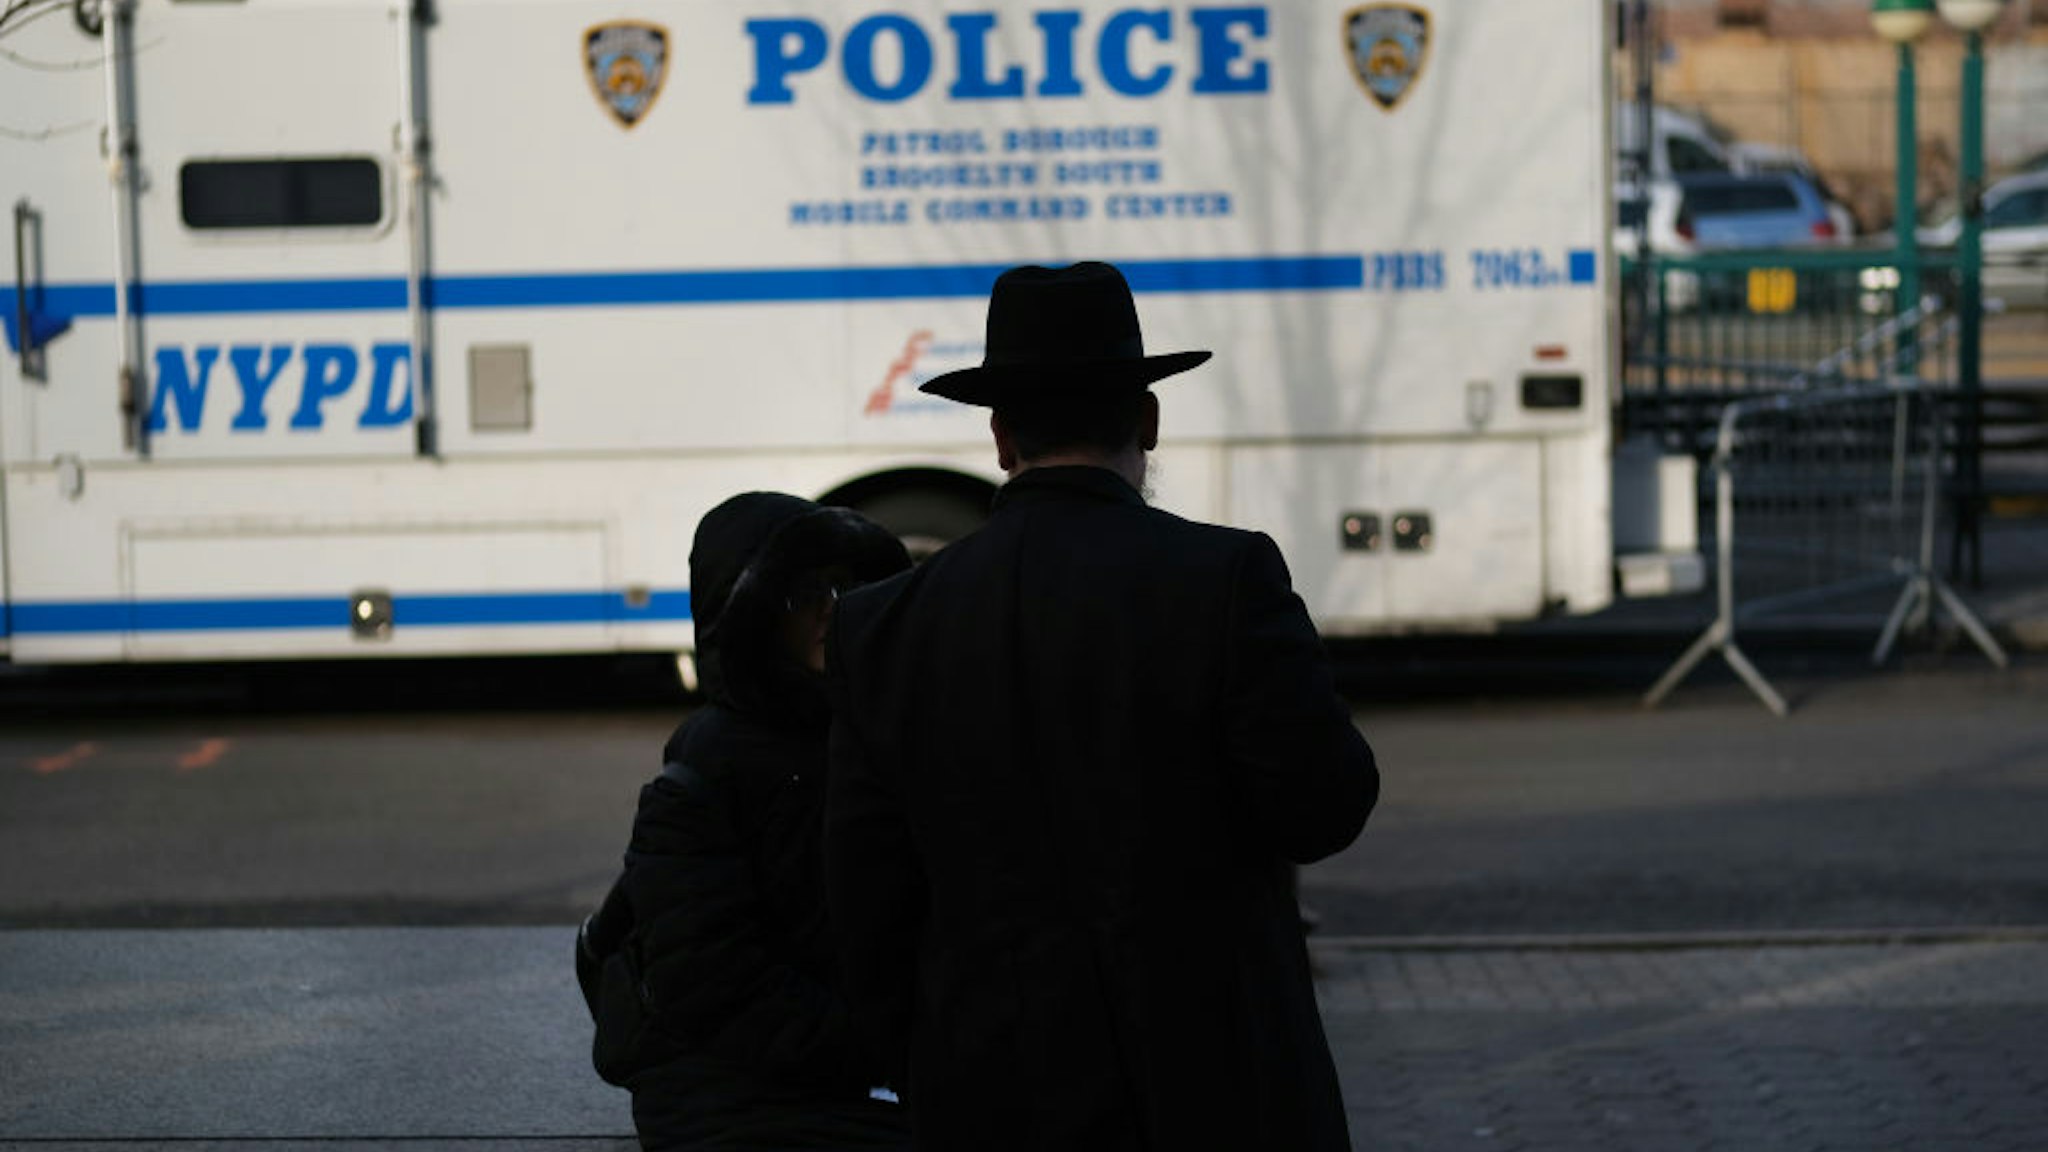 NEW YORK, NEW YORK - DECEMBER 31: People walk through the Orthodox Jewish section of the Crown Heights neighborhood in Brooklyn on December 31, 2019 in New York City. Five Orthodox Jews were stabbed at a synagogue on Saturday evening in the upstate New York town of Monsey. Tensions remain high in Jewish communities following a series of attacks and incidents in recent weeks.